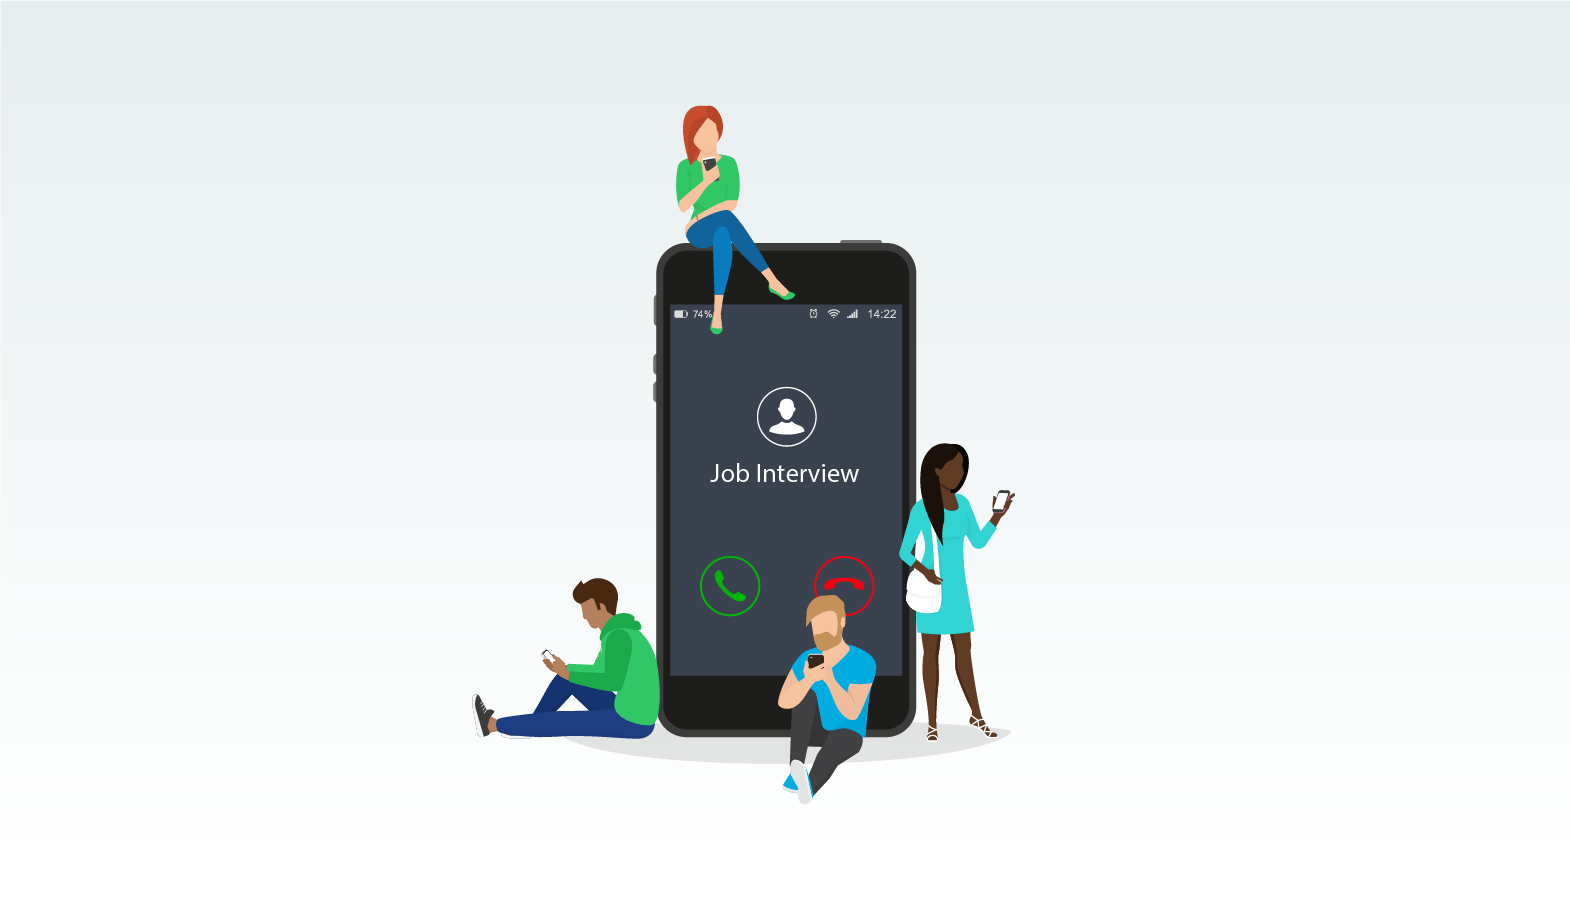 An illustration of a giant smartphone showing an incoming call interface reading "Job Interview" with four people surrounding the phone